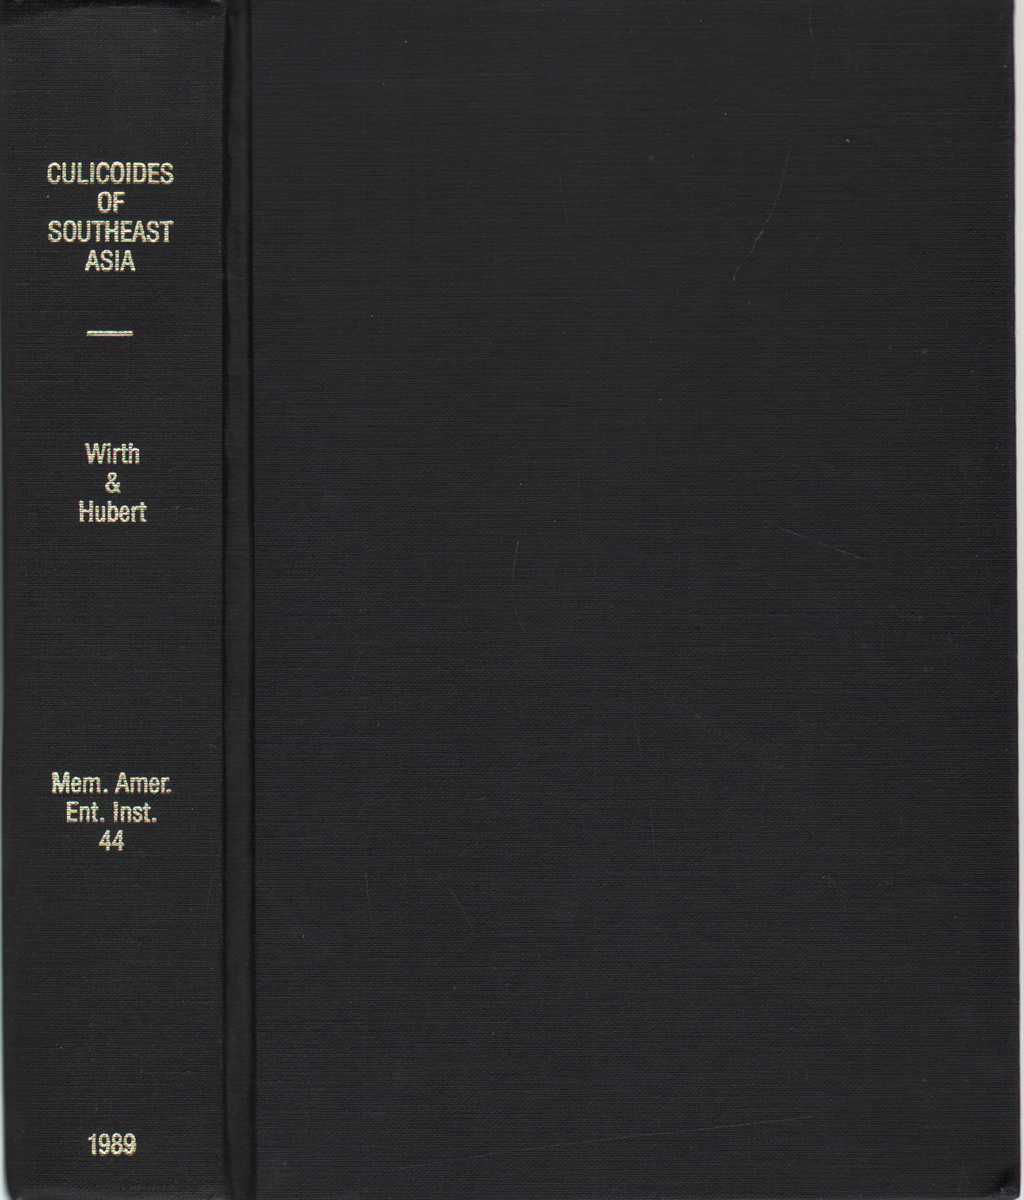 Wirth, Willis & Alexander A. Hubert - THE CULICOIDES OF SOUTHEAST ASIA Memoirs of the American Entomological Institute Number 44